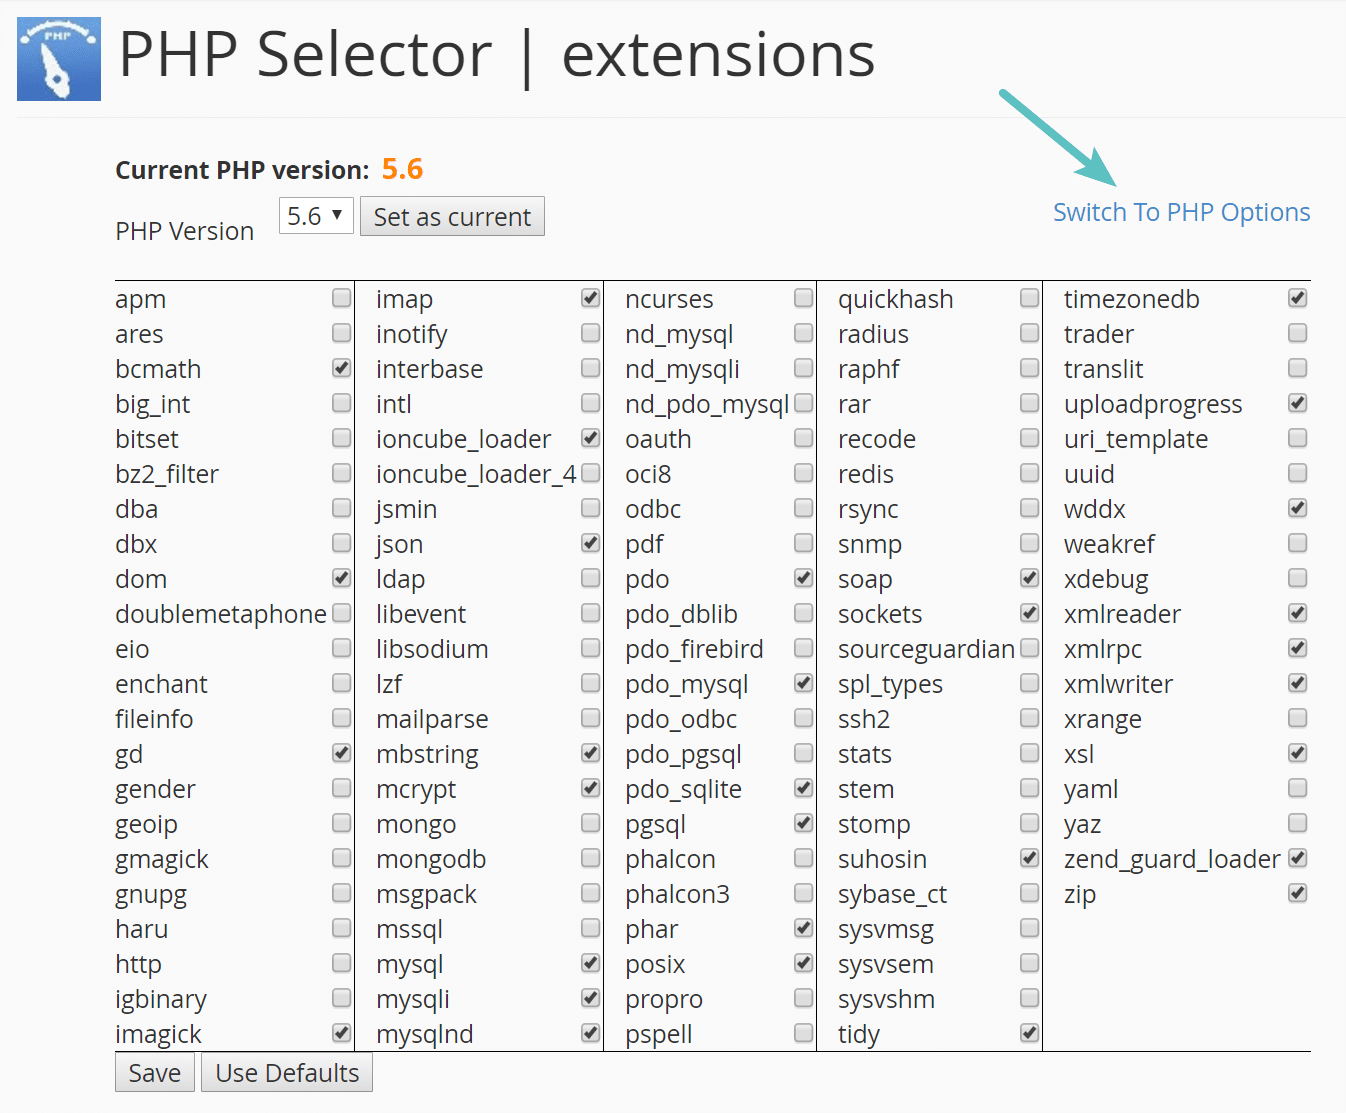 switch to php options